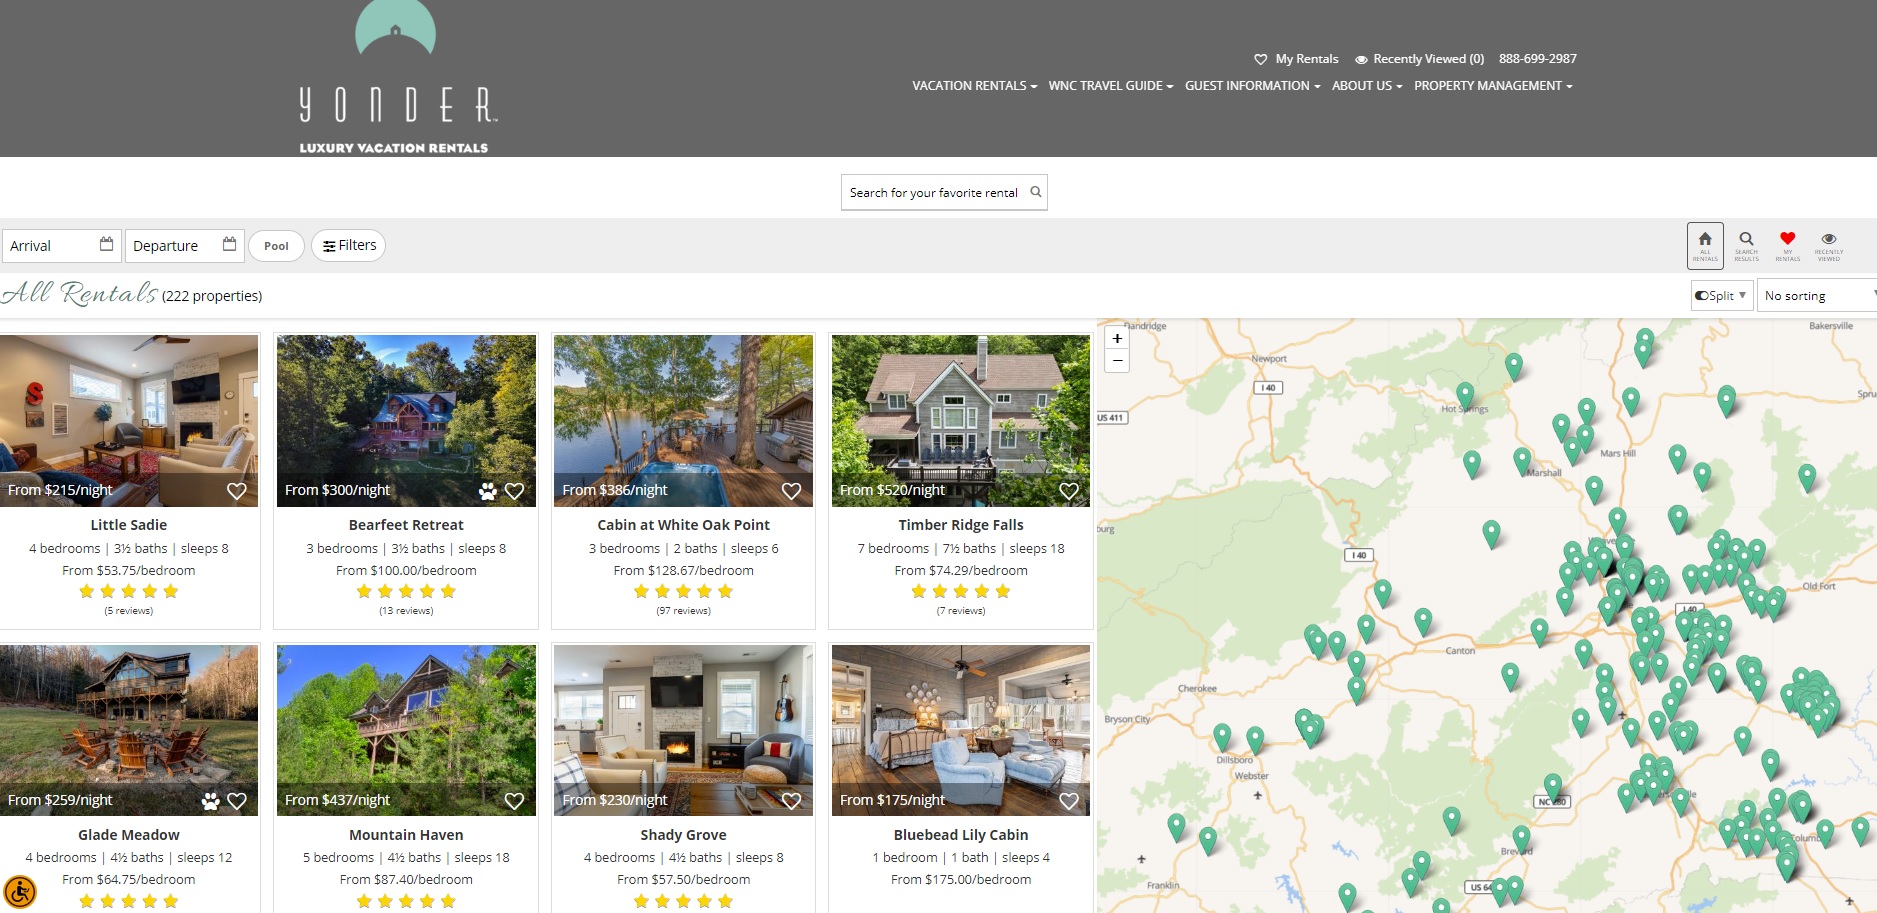 An image of Yonder’s vacation rentals booking page